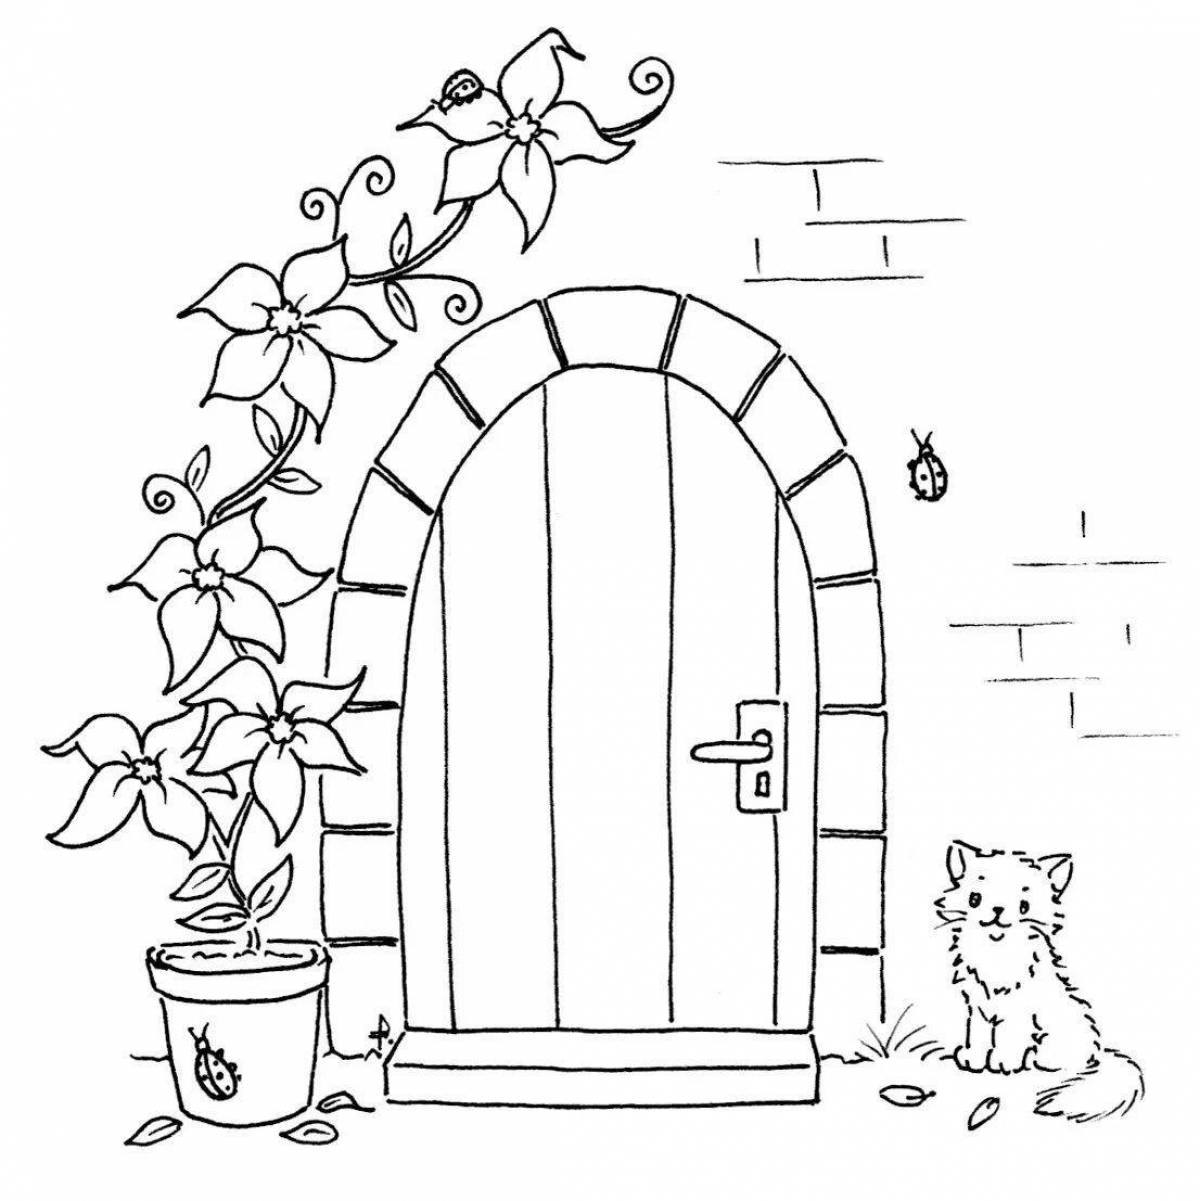 Coloring page majestic entrance